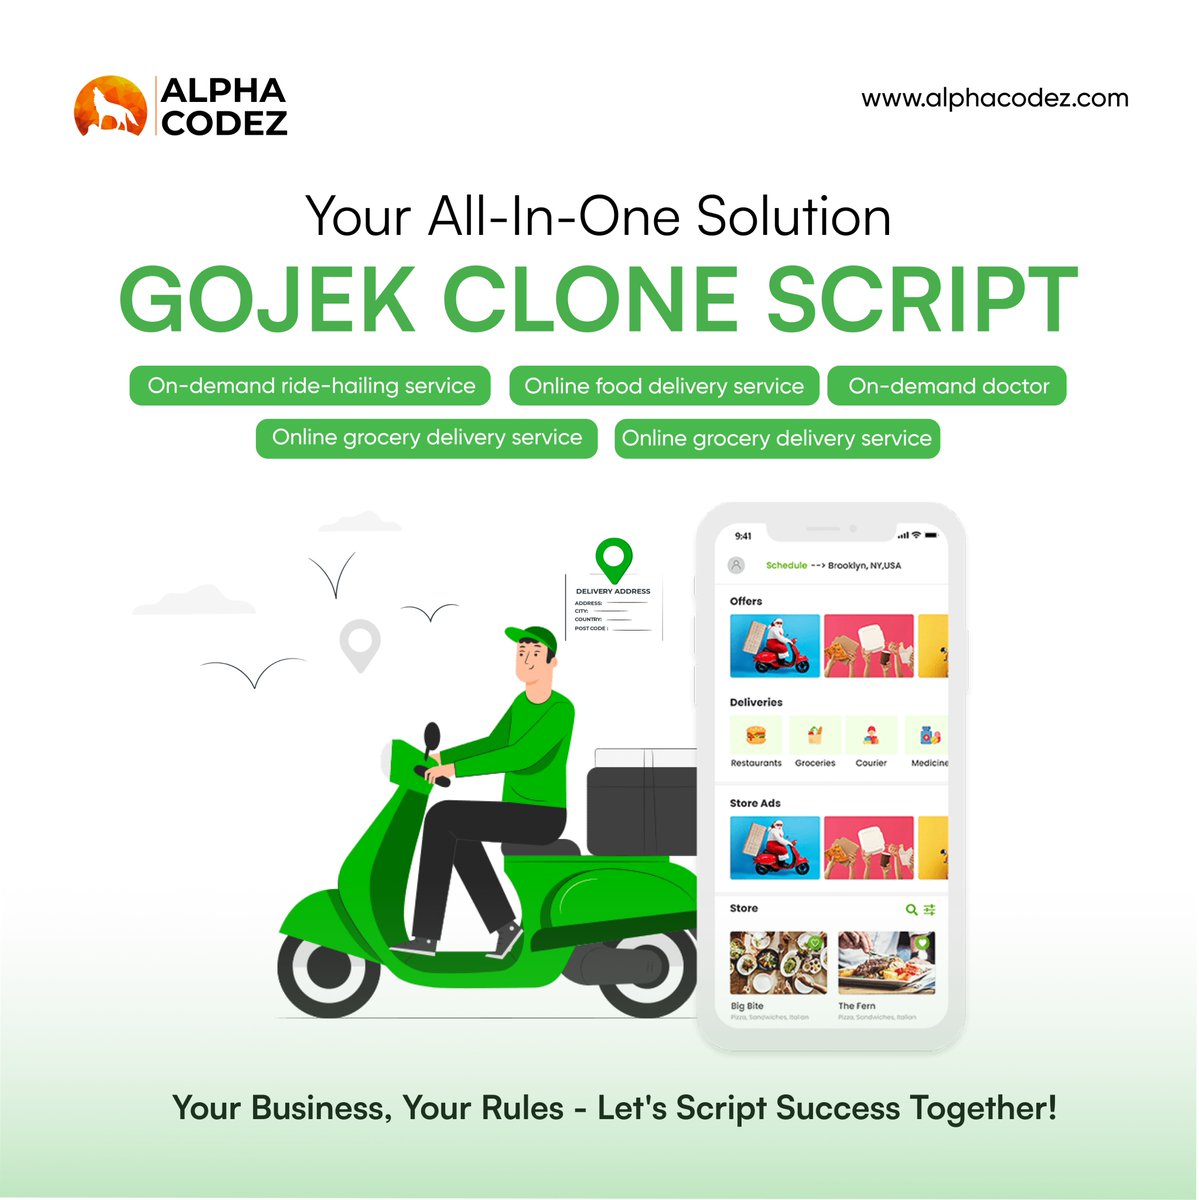 🚀 Dive into the future of on-demand services with #alphacodez Gojek Clone Script! 

Refer : bit.ly/gojek-clone-sc…

#gojekclonescript #gojekcloneapp #gojekclone #clonescript #cloneapp #startups  #revenuegrowth #Businesssuccess #business #Businesstips  #business #entrepreneur